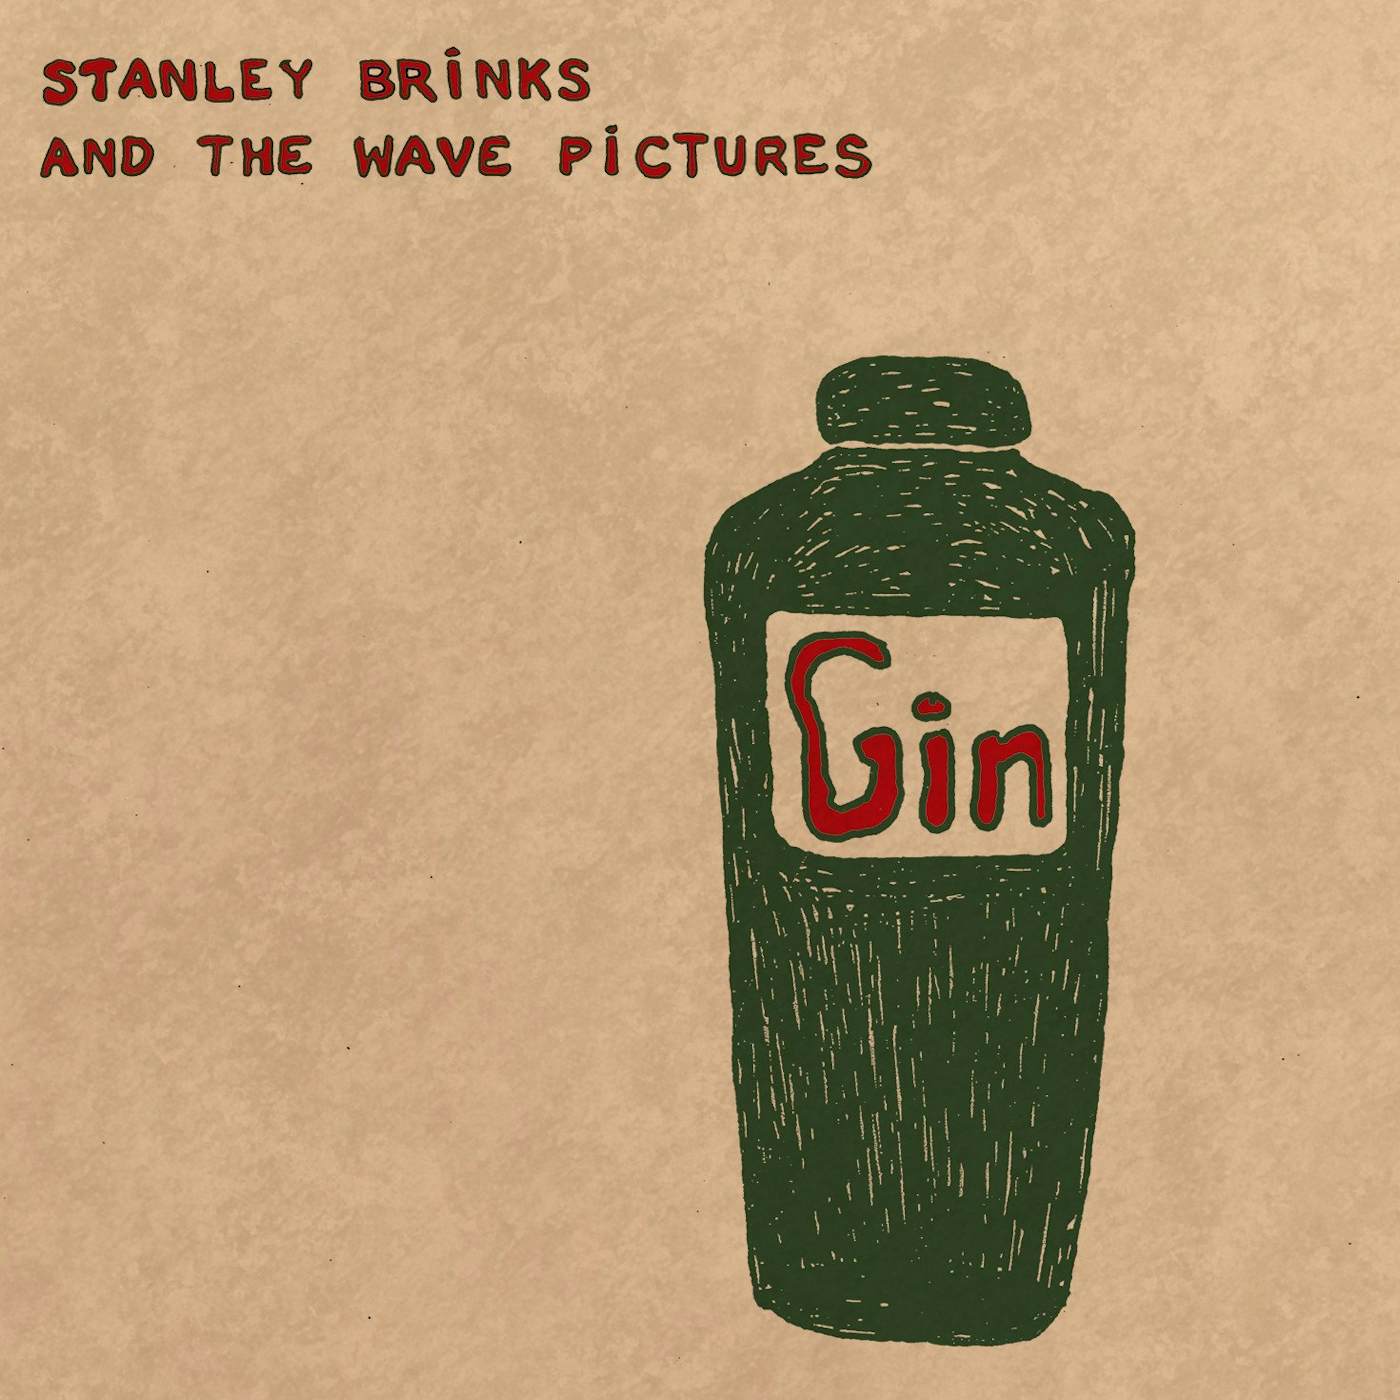 Stanley Brinks And The Wave Pictures 'Gin' Vinyl Record